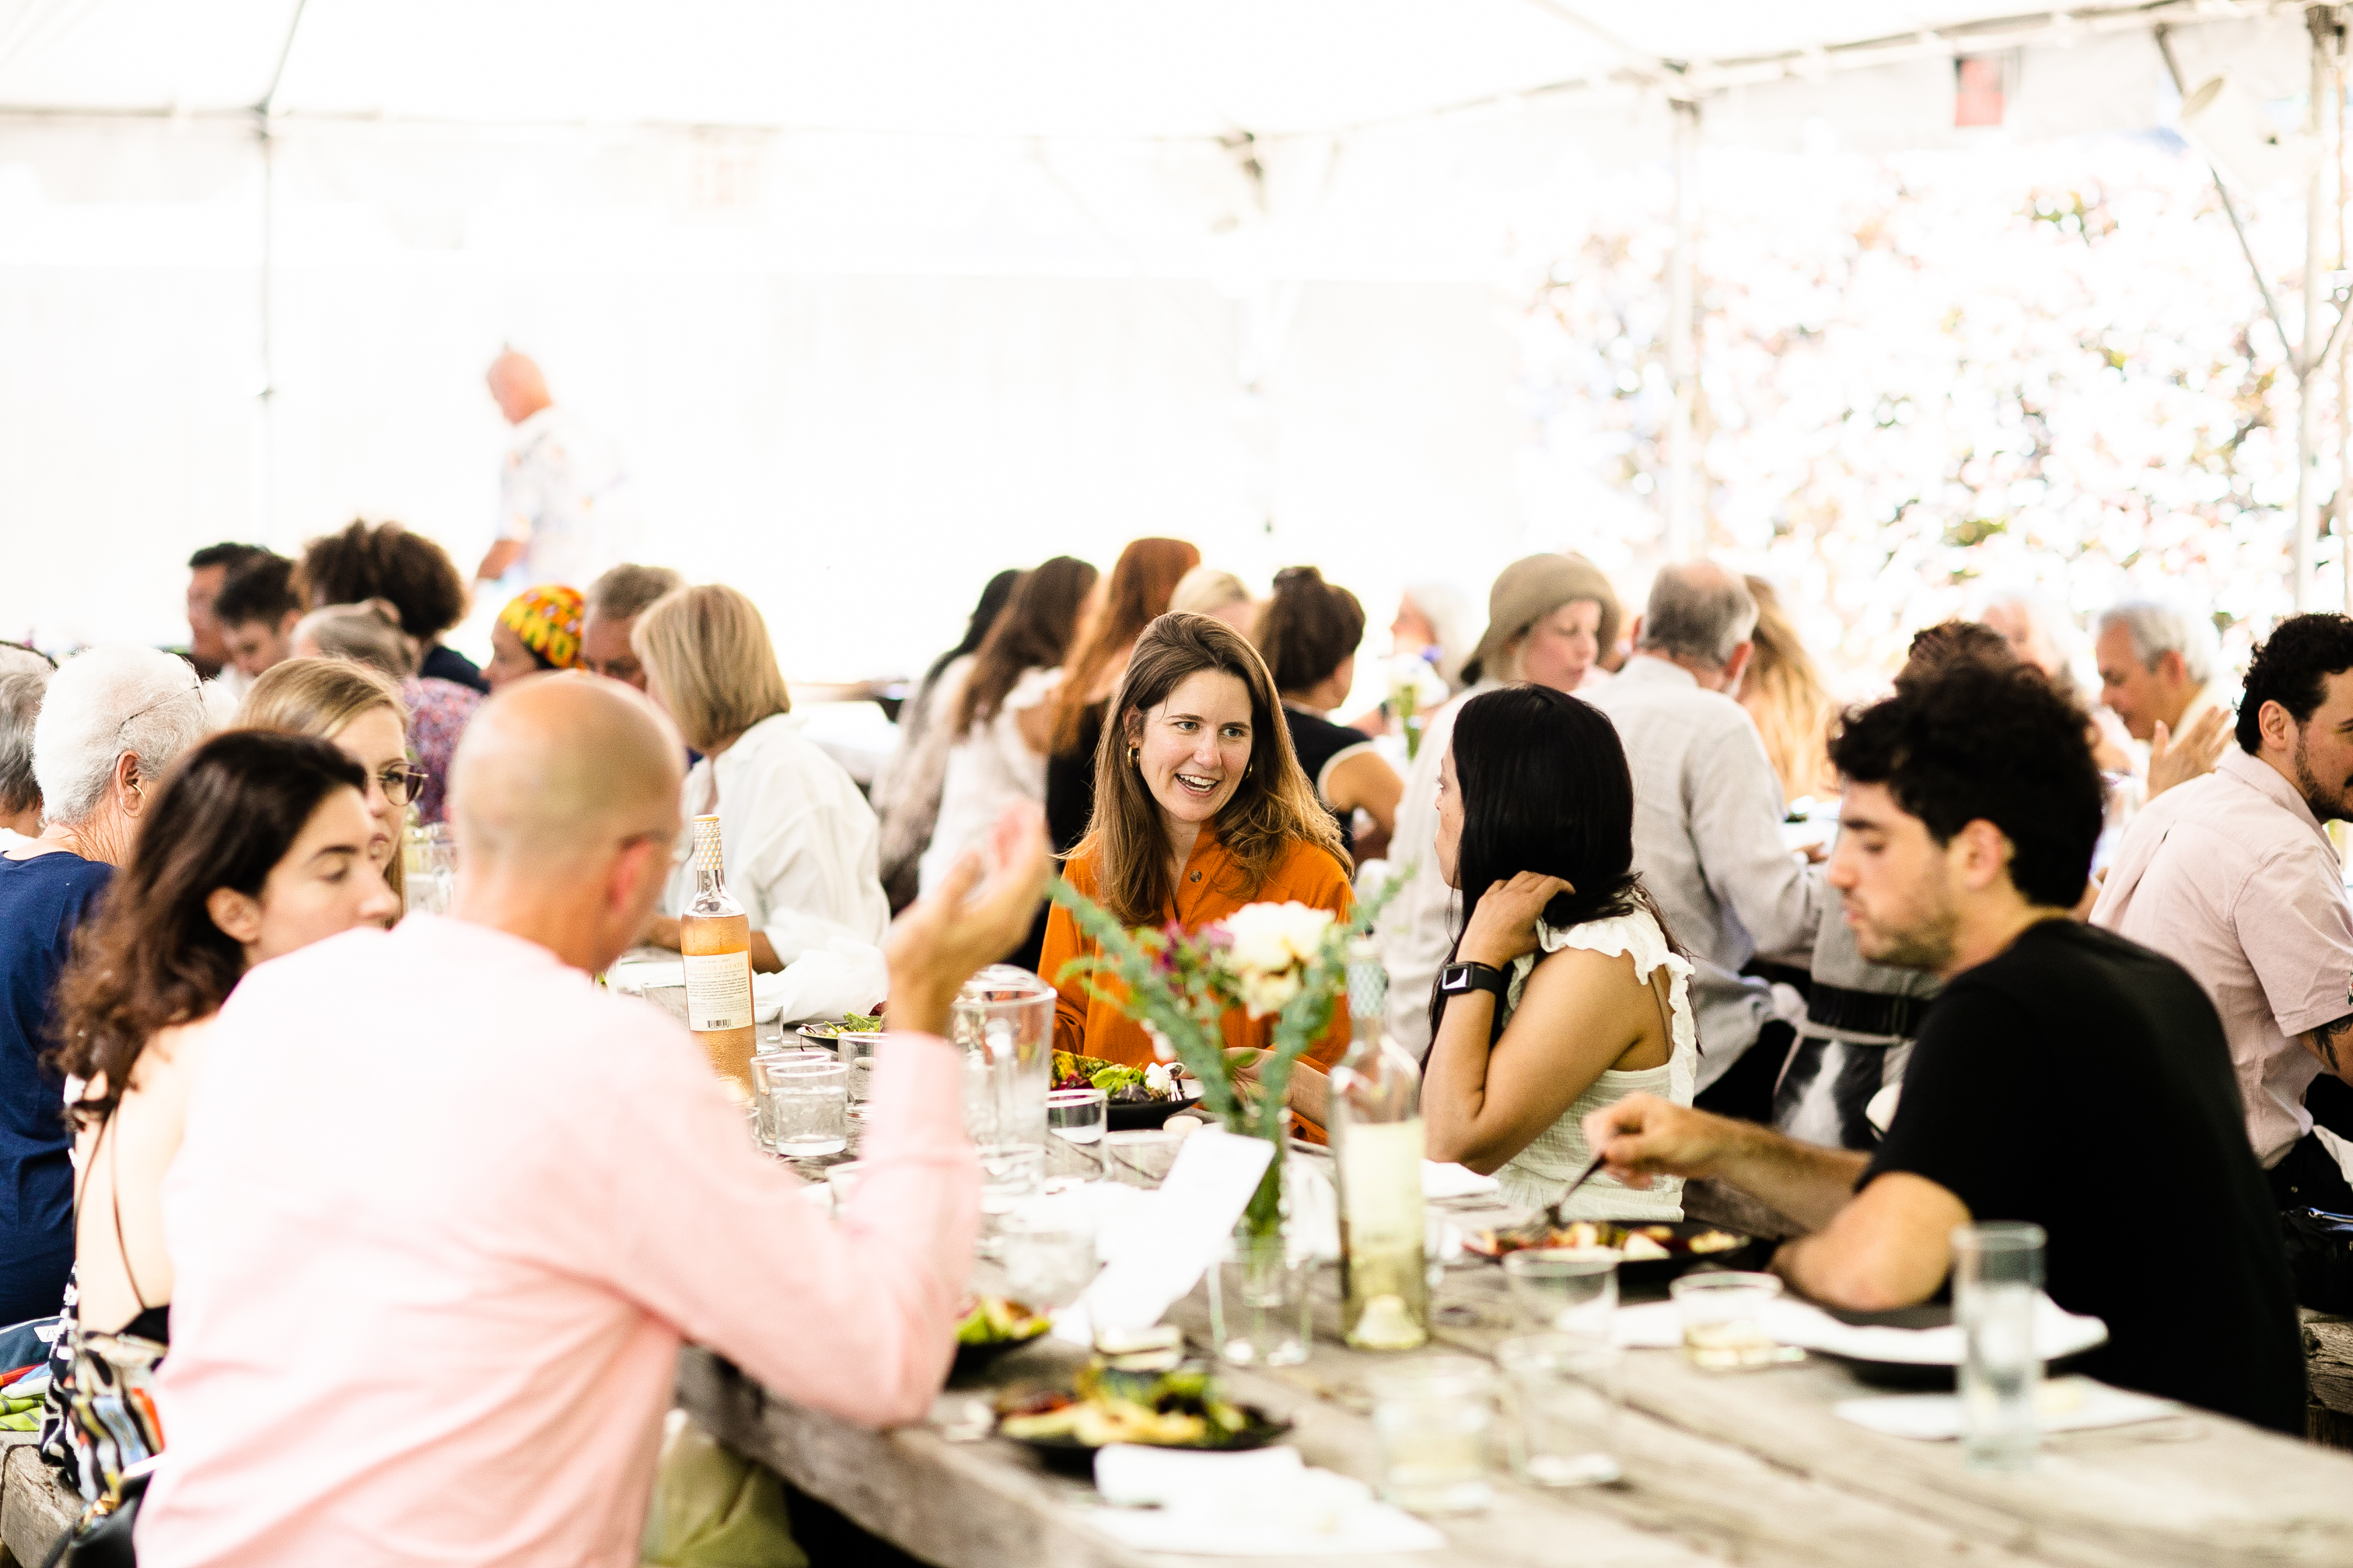 Scene from a previous Artists Table Brunch at The Watermill Center. © JESSICA DALENE